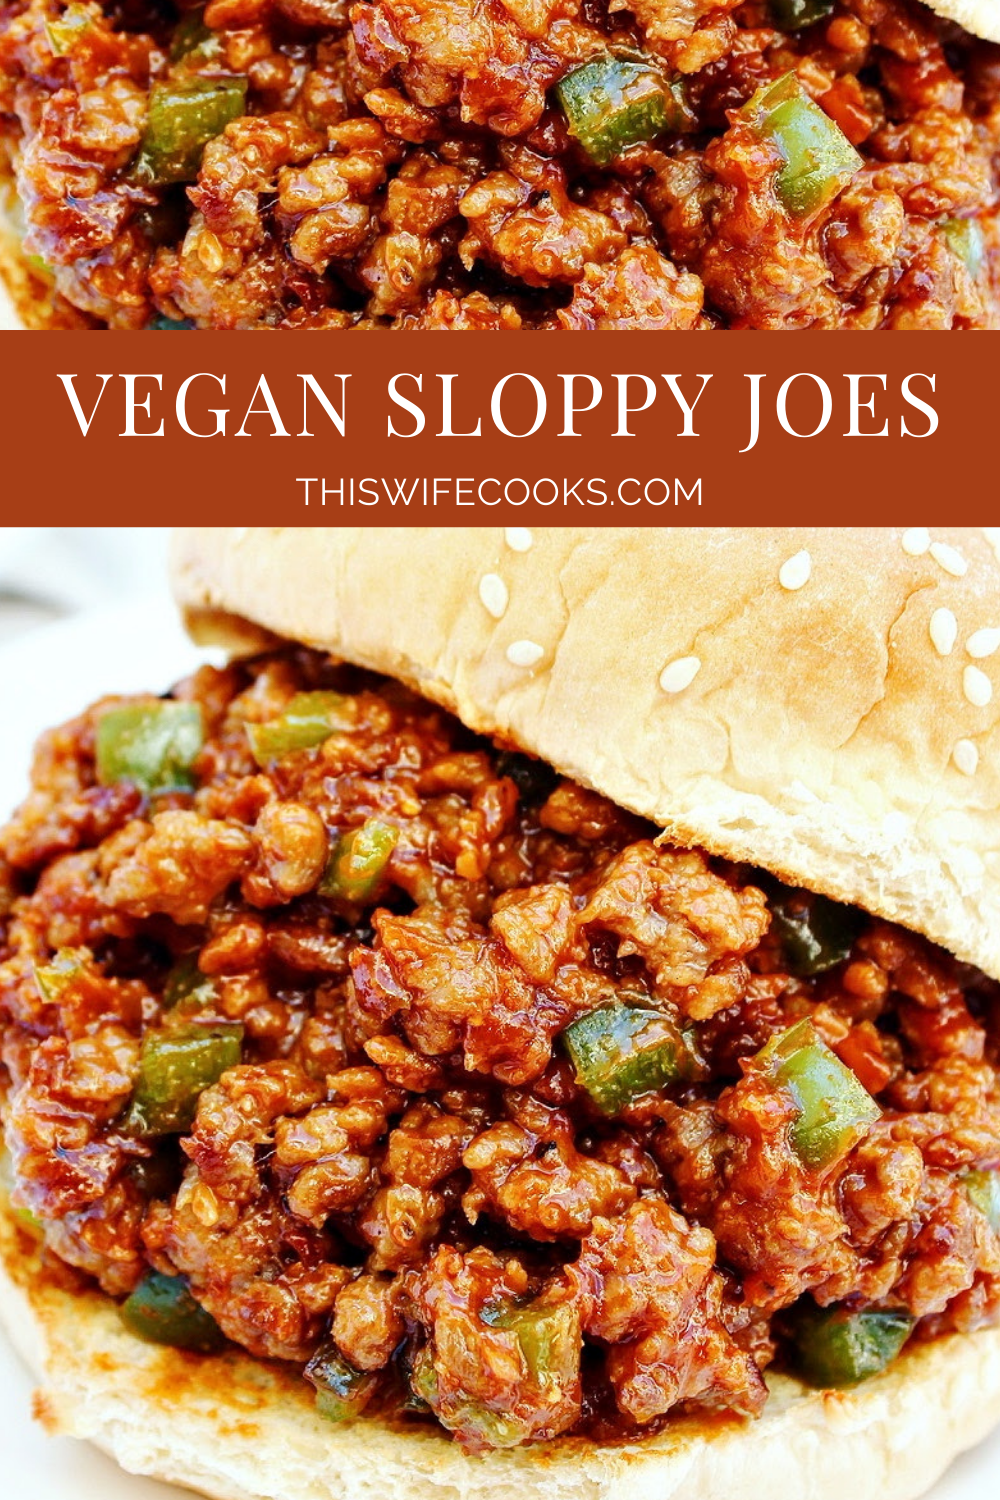 Vegan Sloppy Joes - A hearty and delicious plant-based version of the old-school classic! via @thiswifecooks